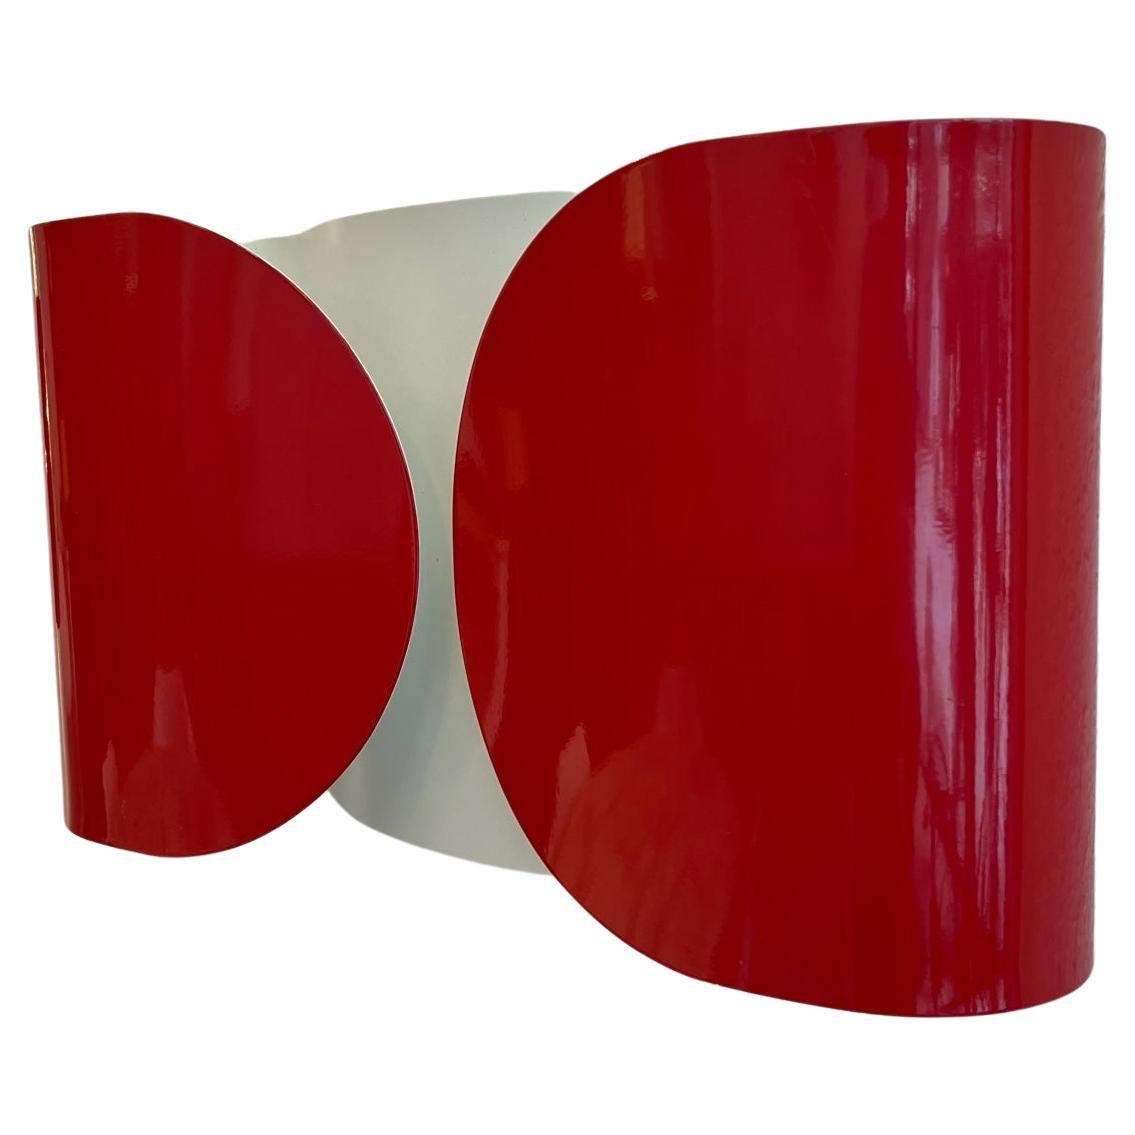 Vintage Rare Set of 3 Red Foglio Wall Lamps by Tobia Scarpa for Flos circa 1970s For Sale